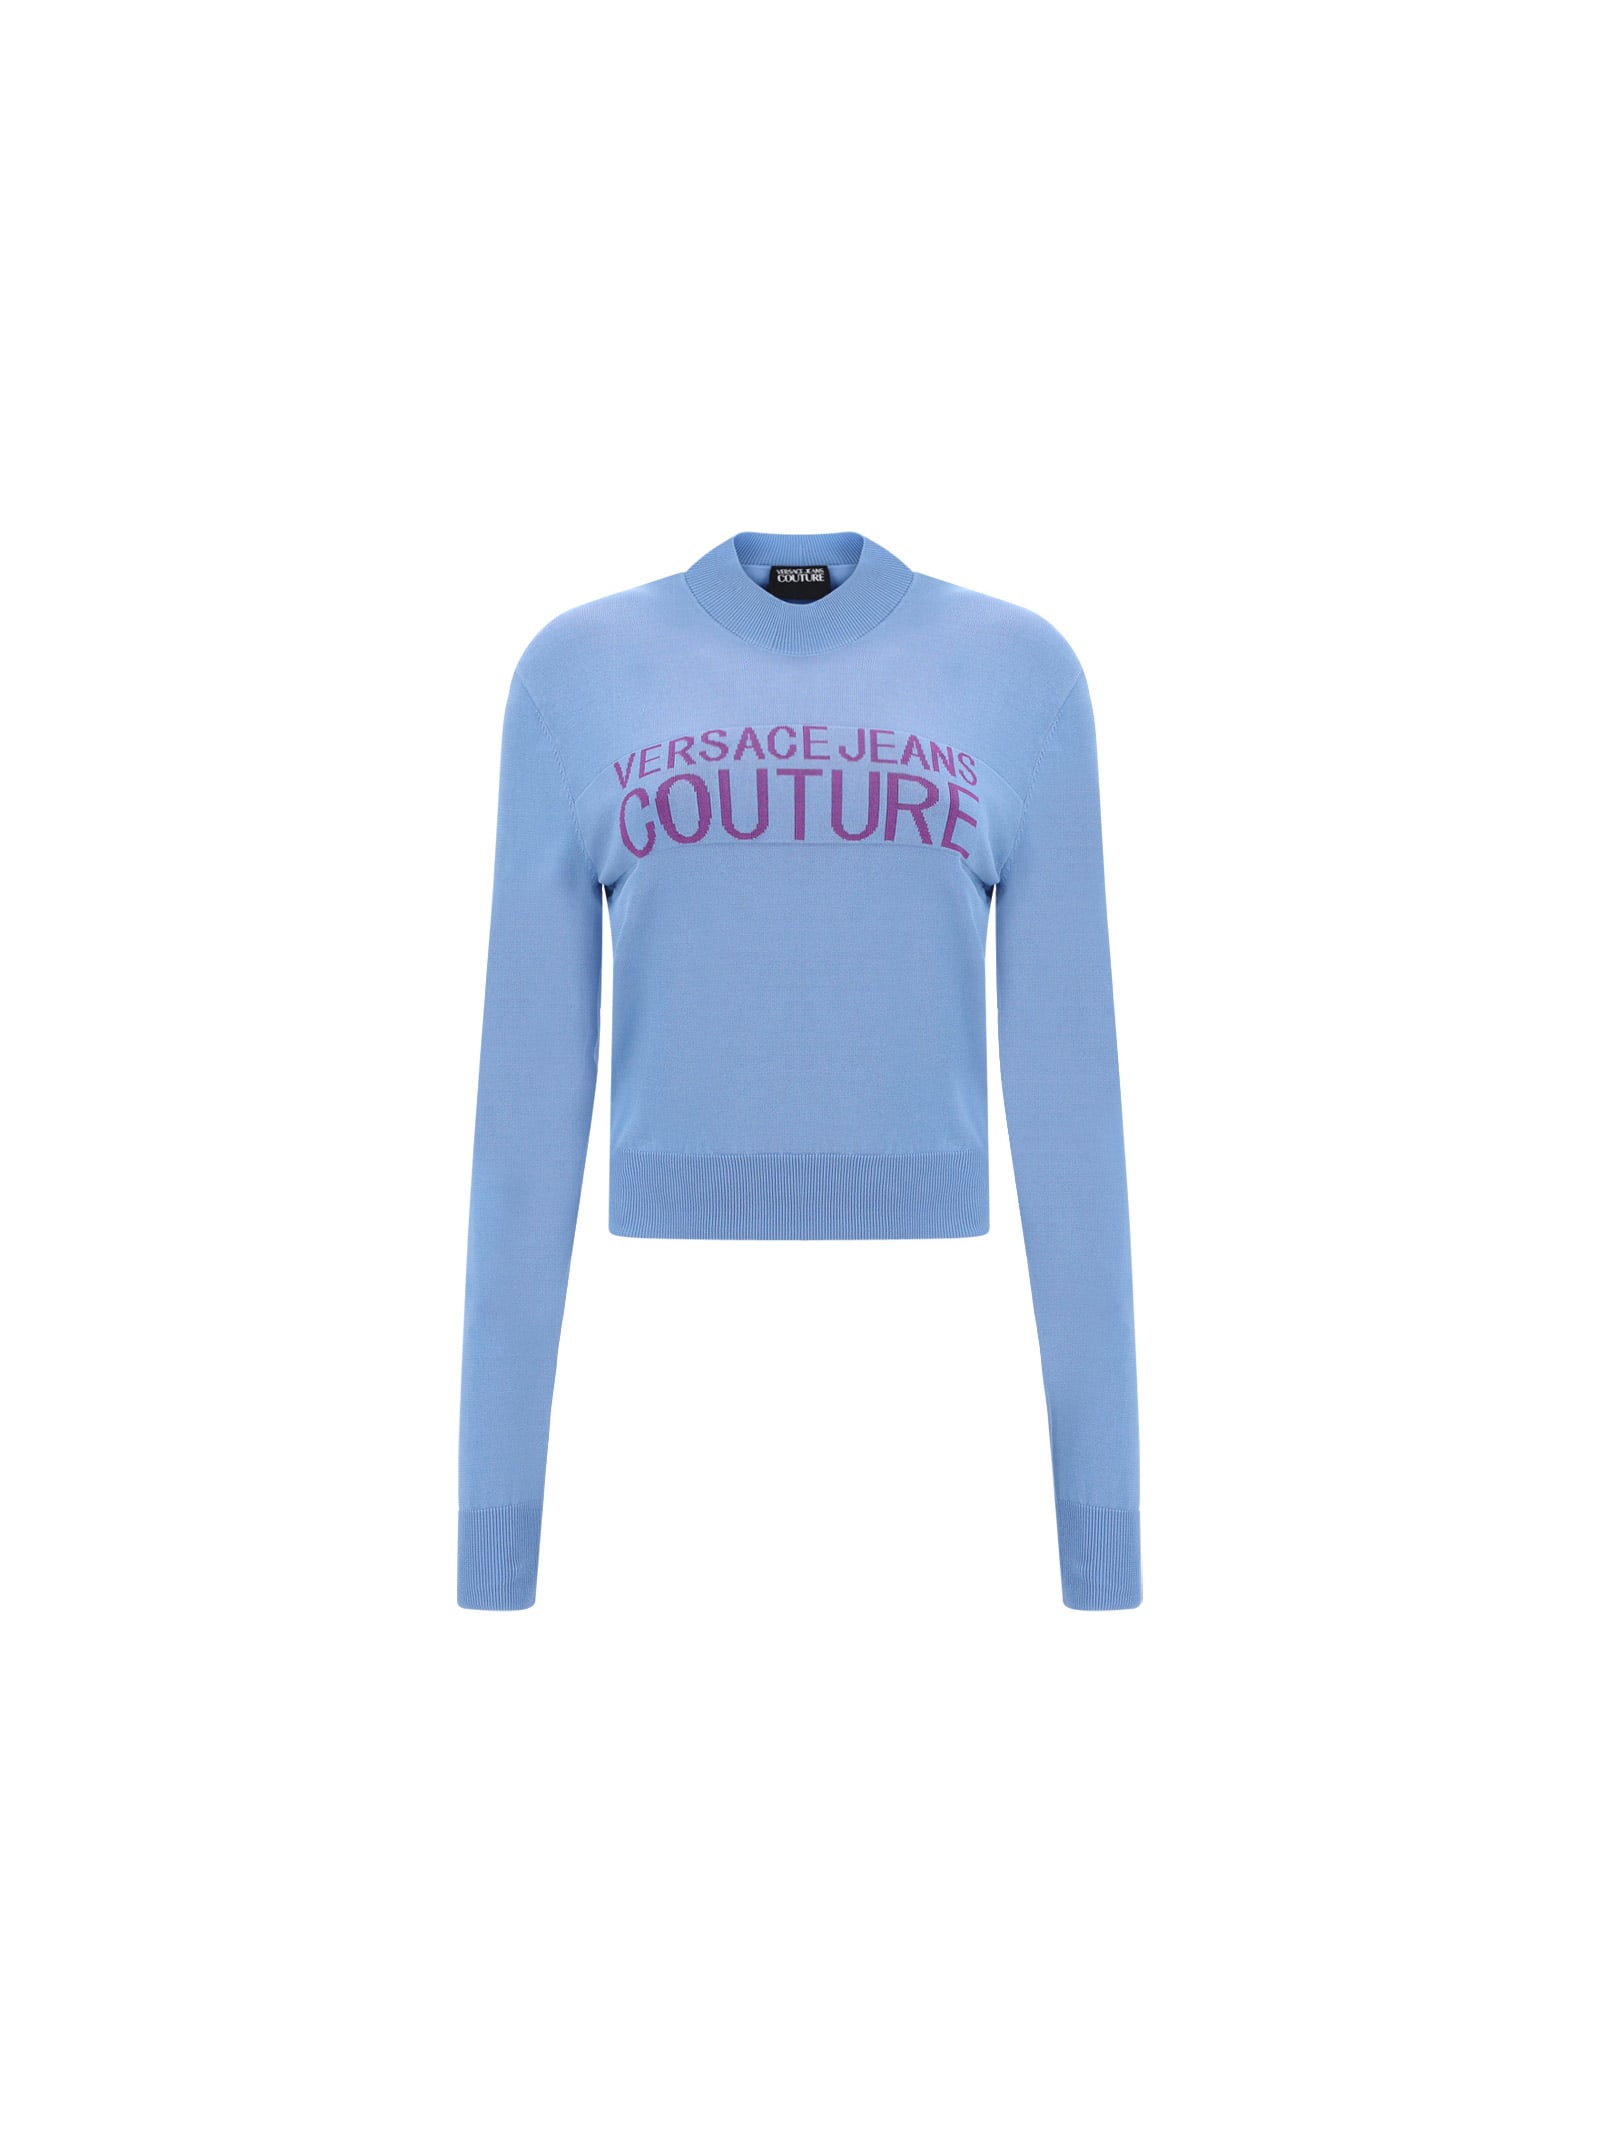 Versace Jeans Couture Knit